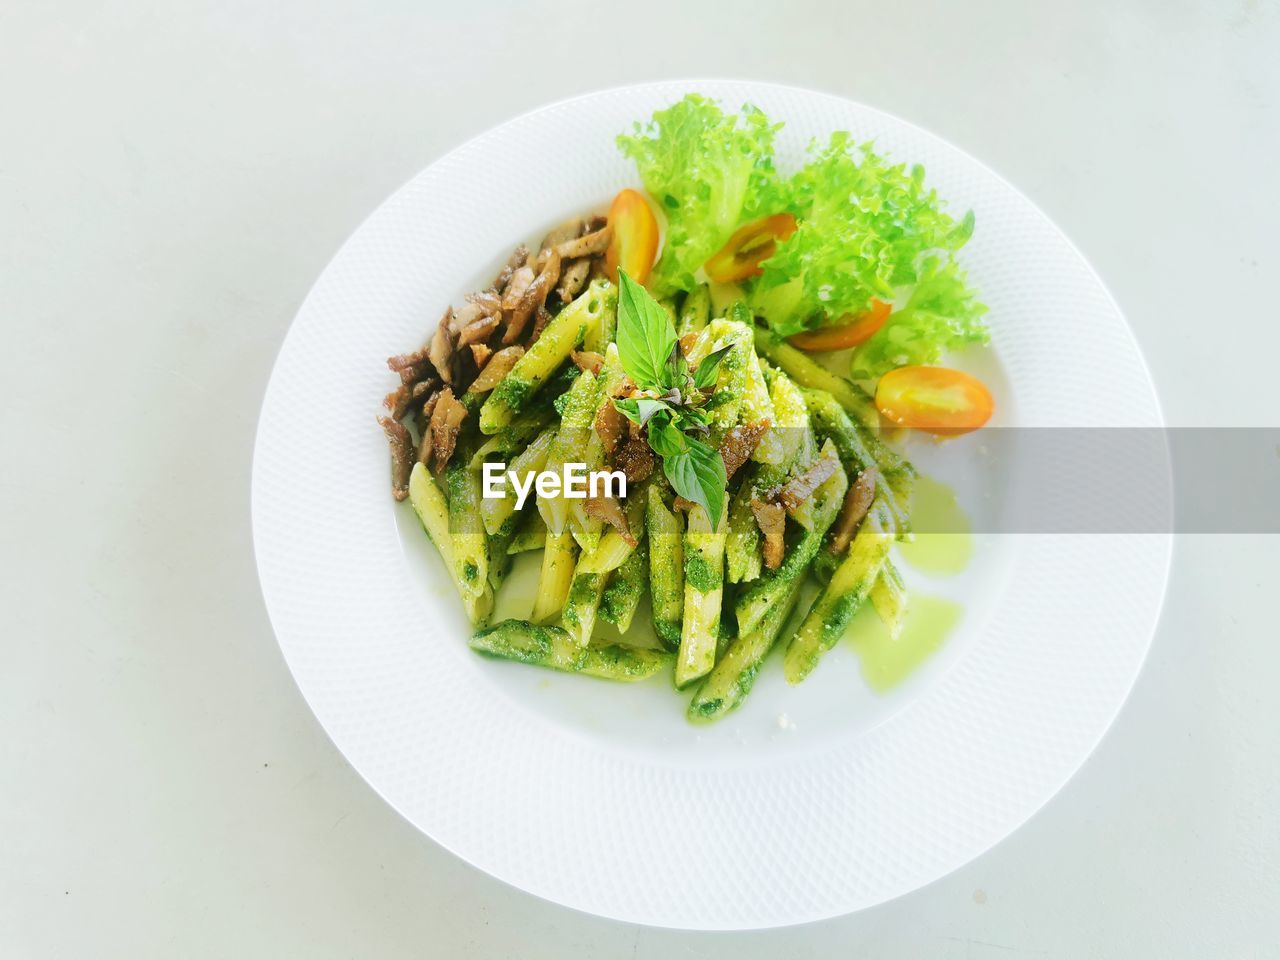 HIGH ANGLE VIEW OF SALAD SERVED IN PLATE